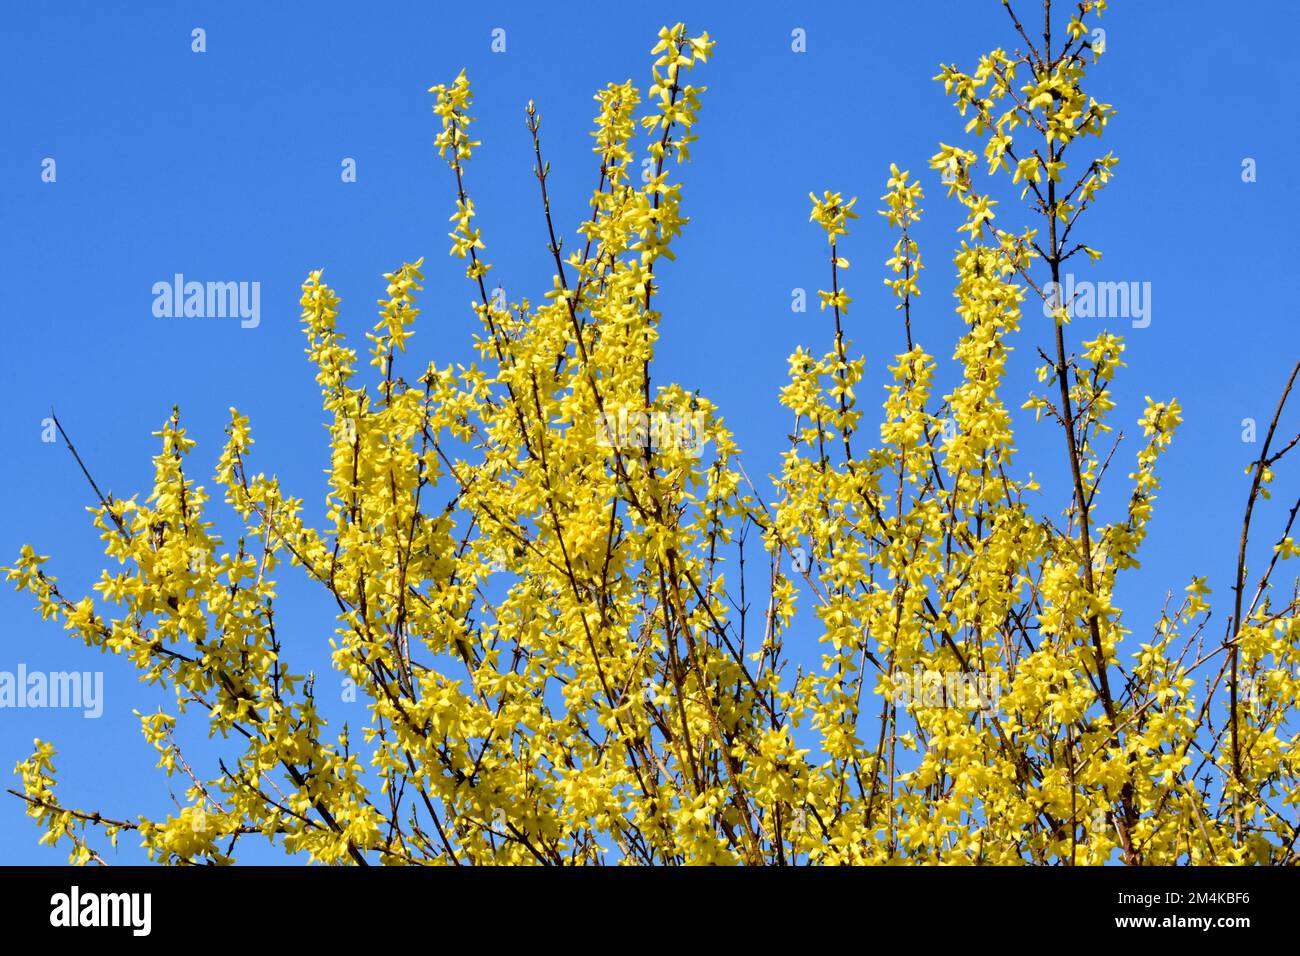 A tree with yellow foliage against a blue sky Stock Photo